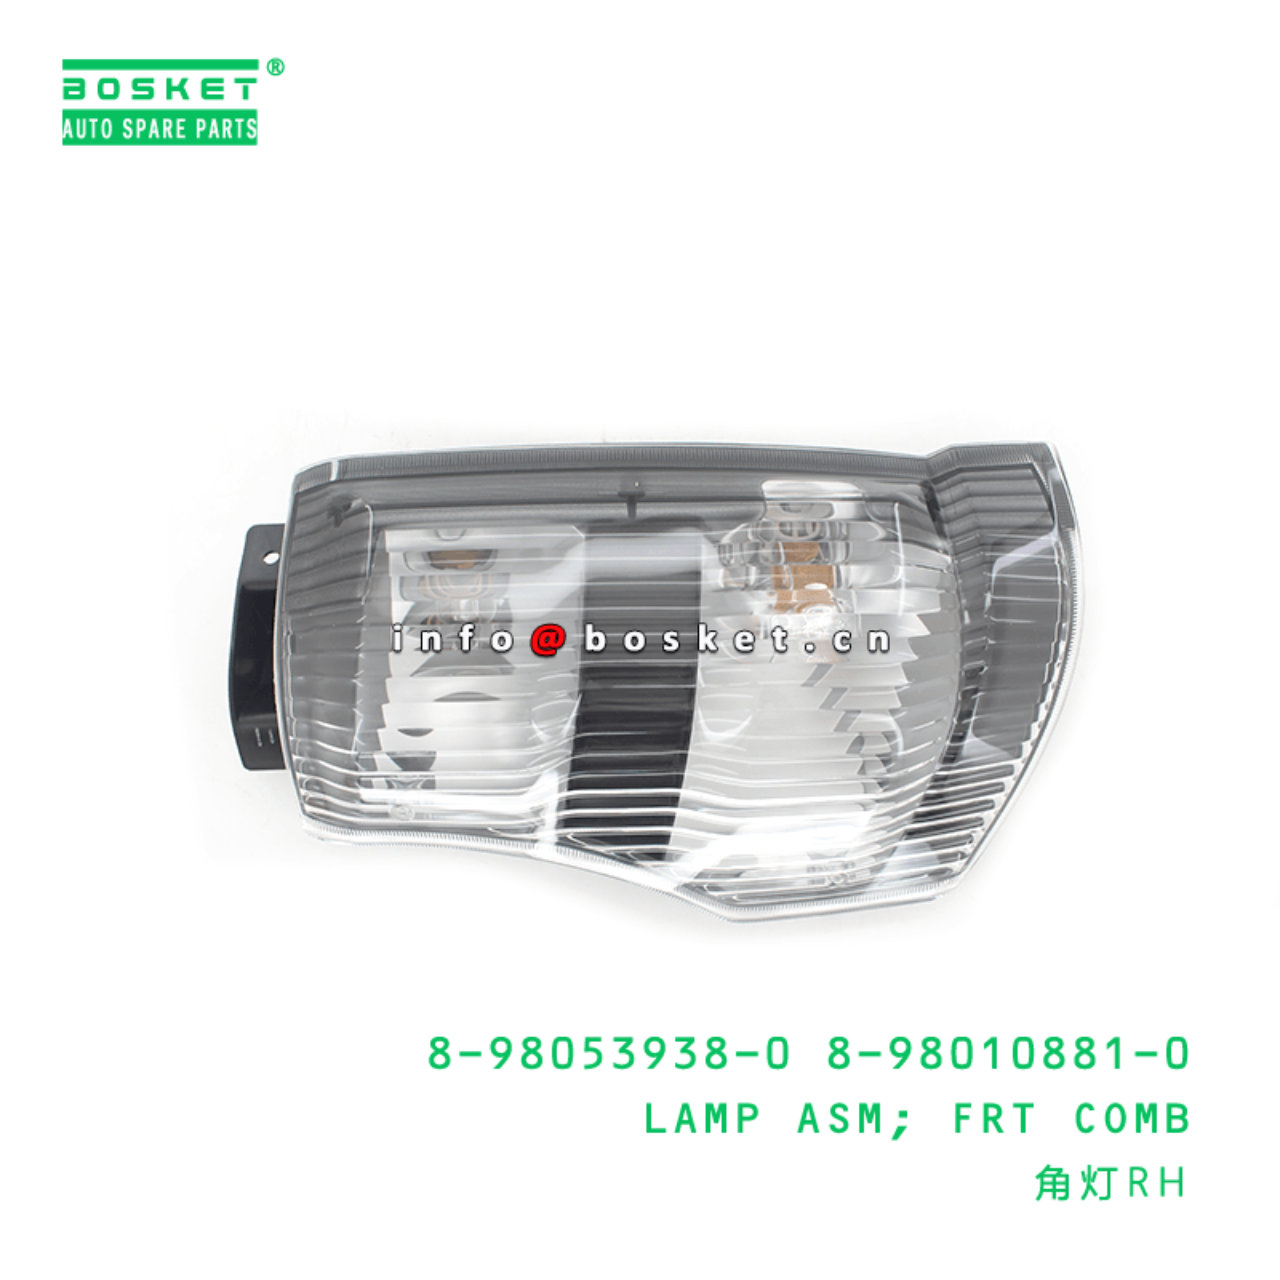 8-98053938-0 8-98010881-0 Front Combination Lamp Assembly 8980539380 8980108810 Suitable for ISUZU 6